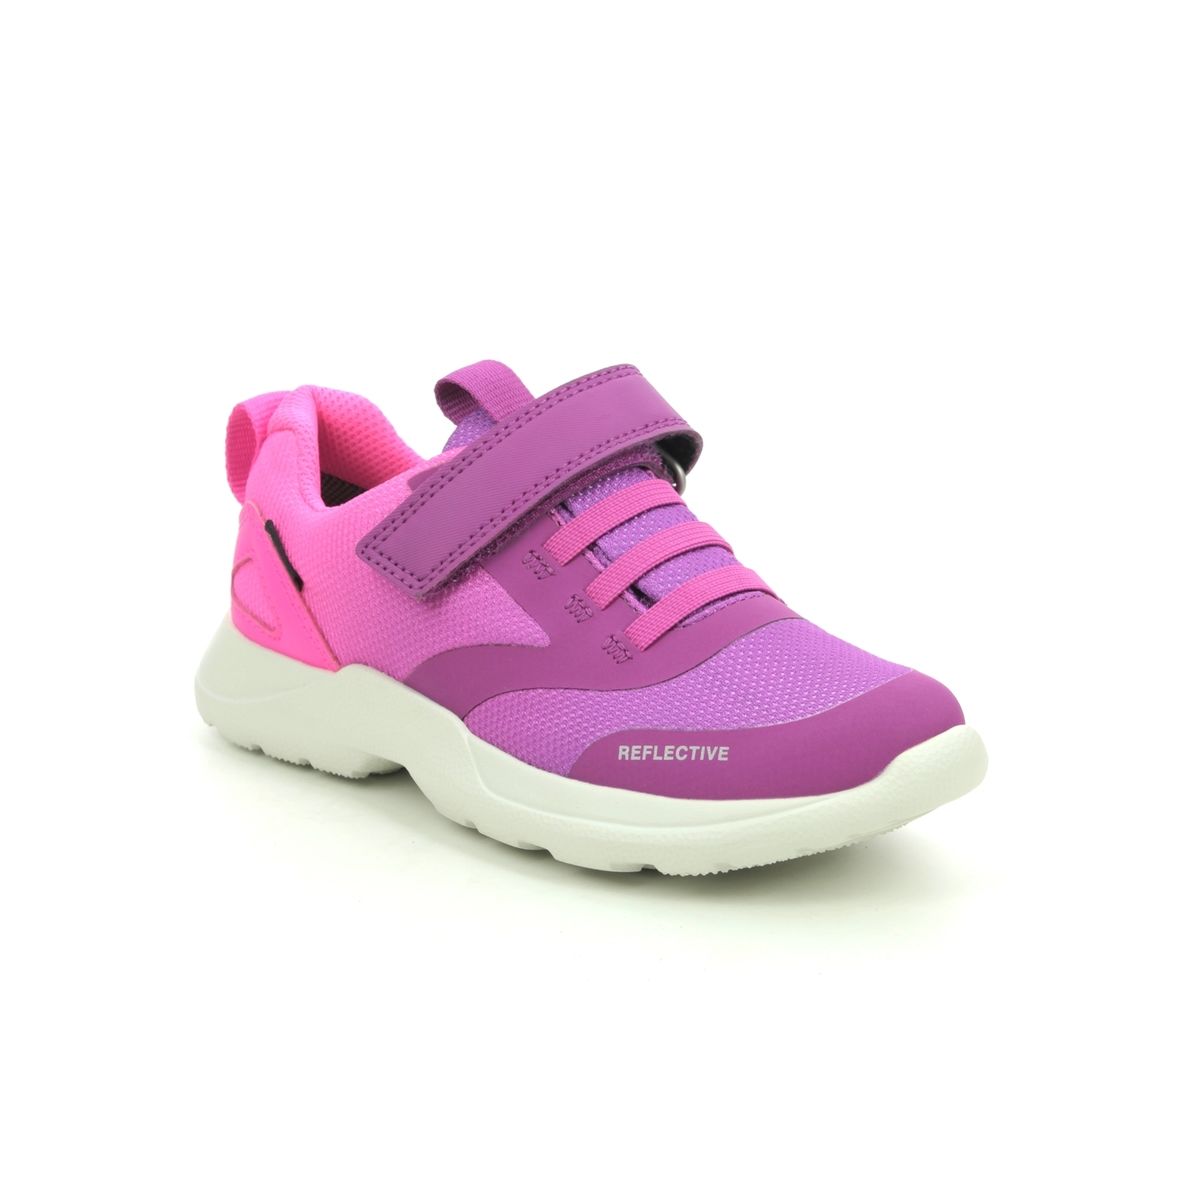 Superfit Rush Jnr G Gtx 1009209-5500 Pink trainers